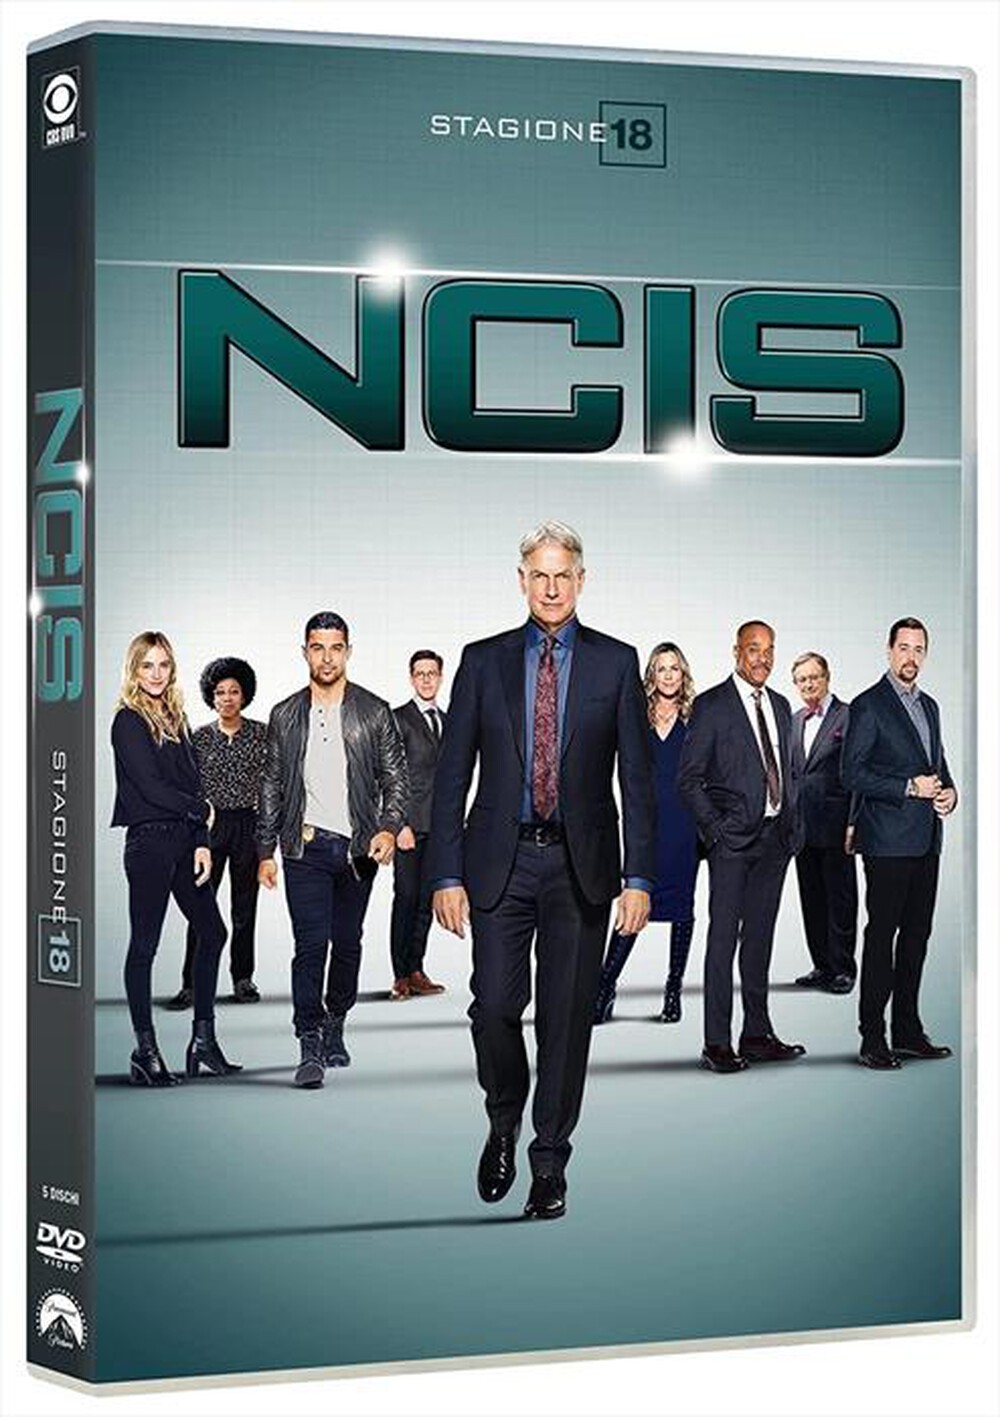 "PARAMOUNT PICTURE - Ncis - Stagione 18 (5 Dvd)"